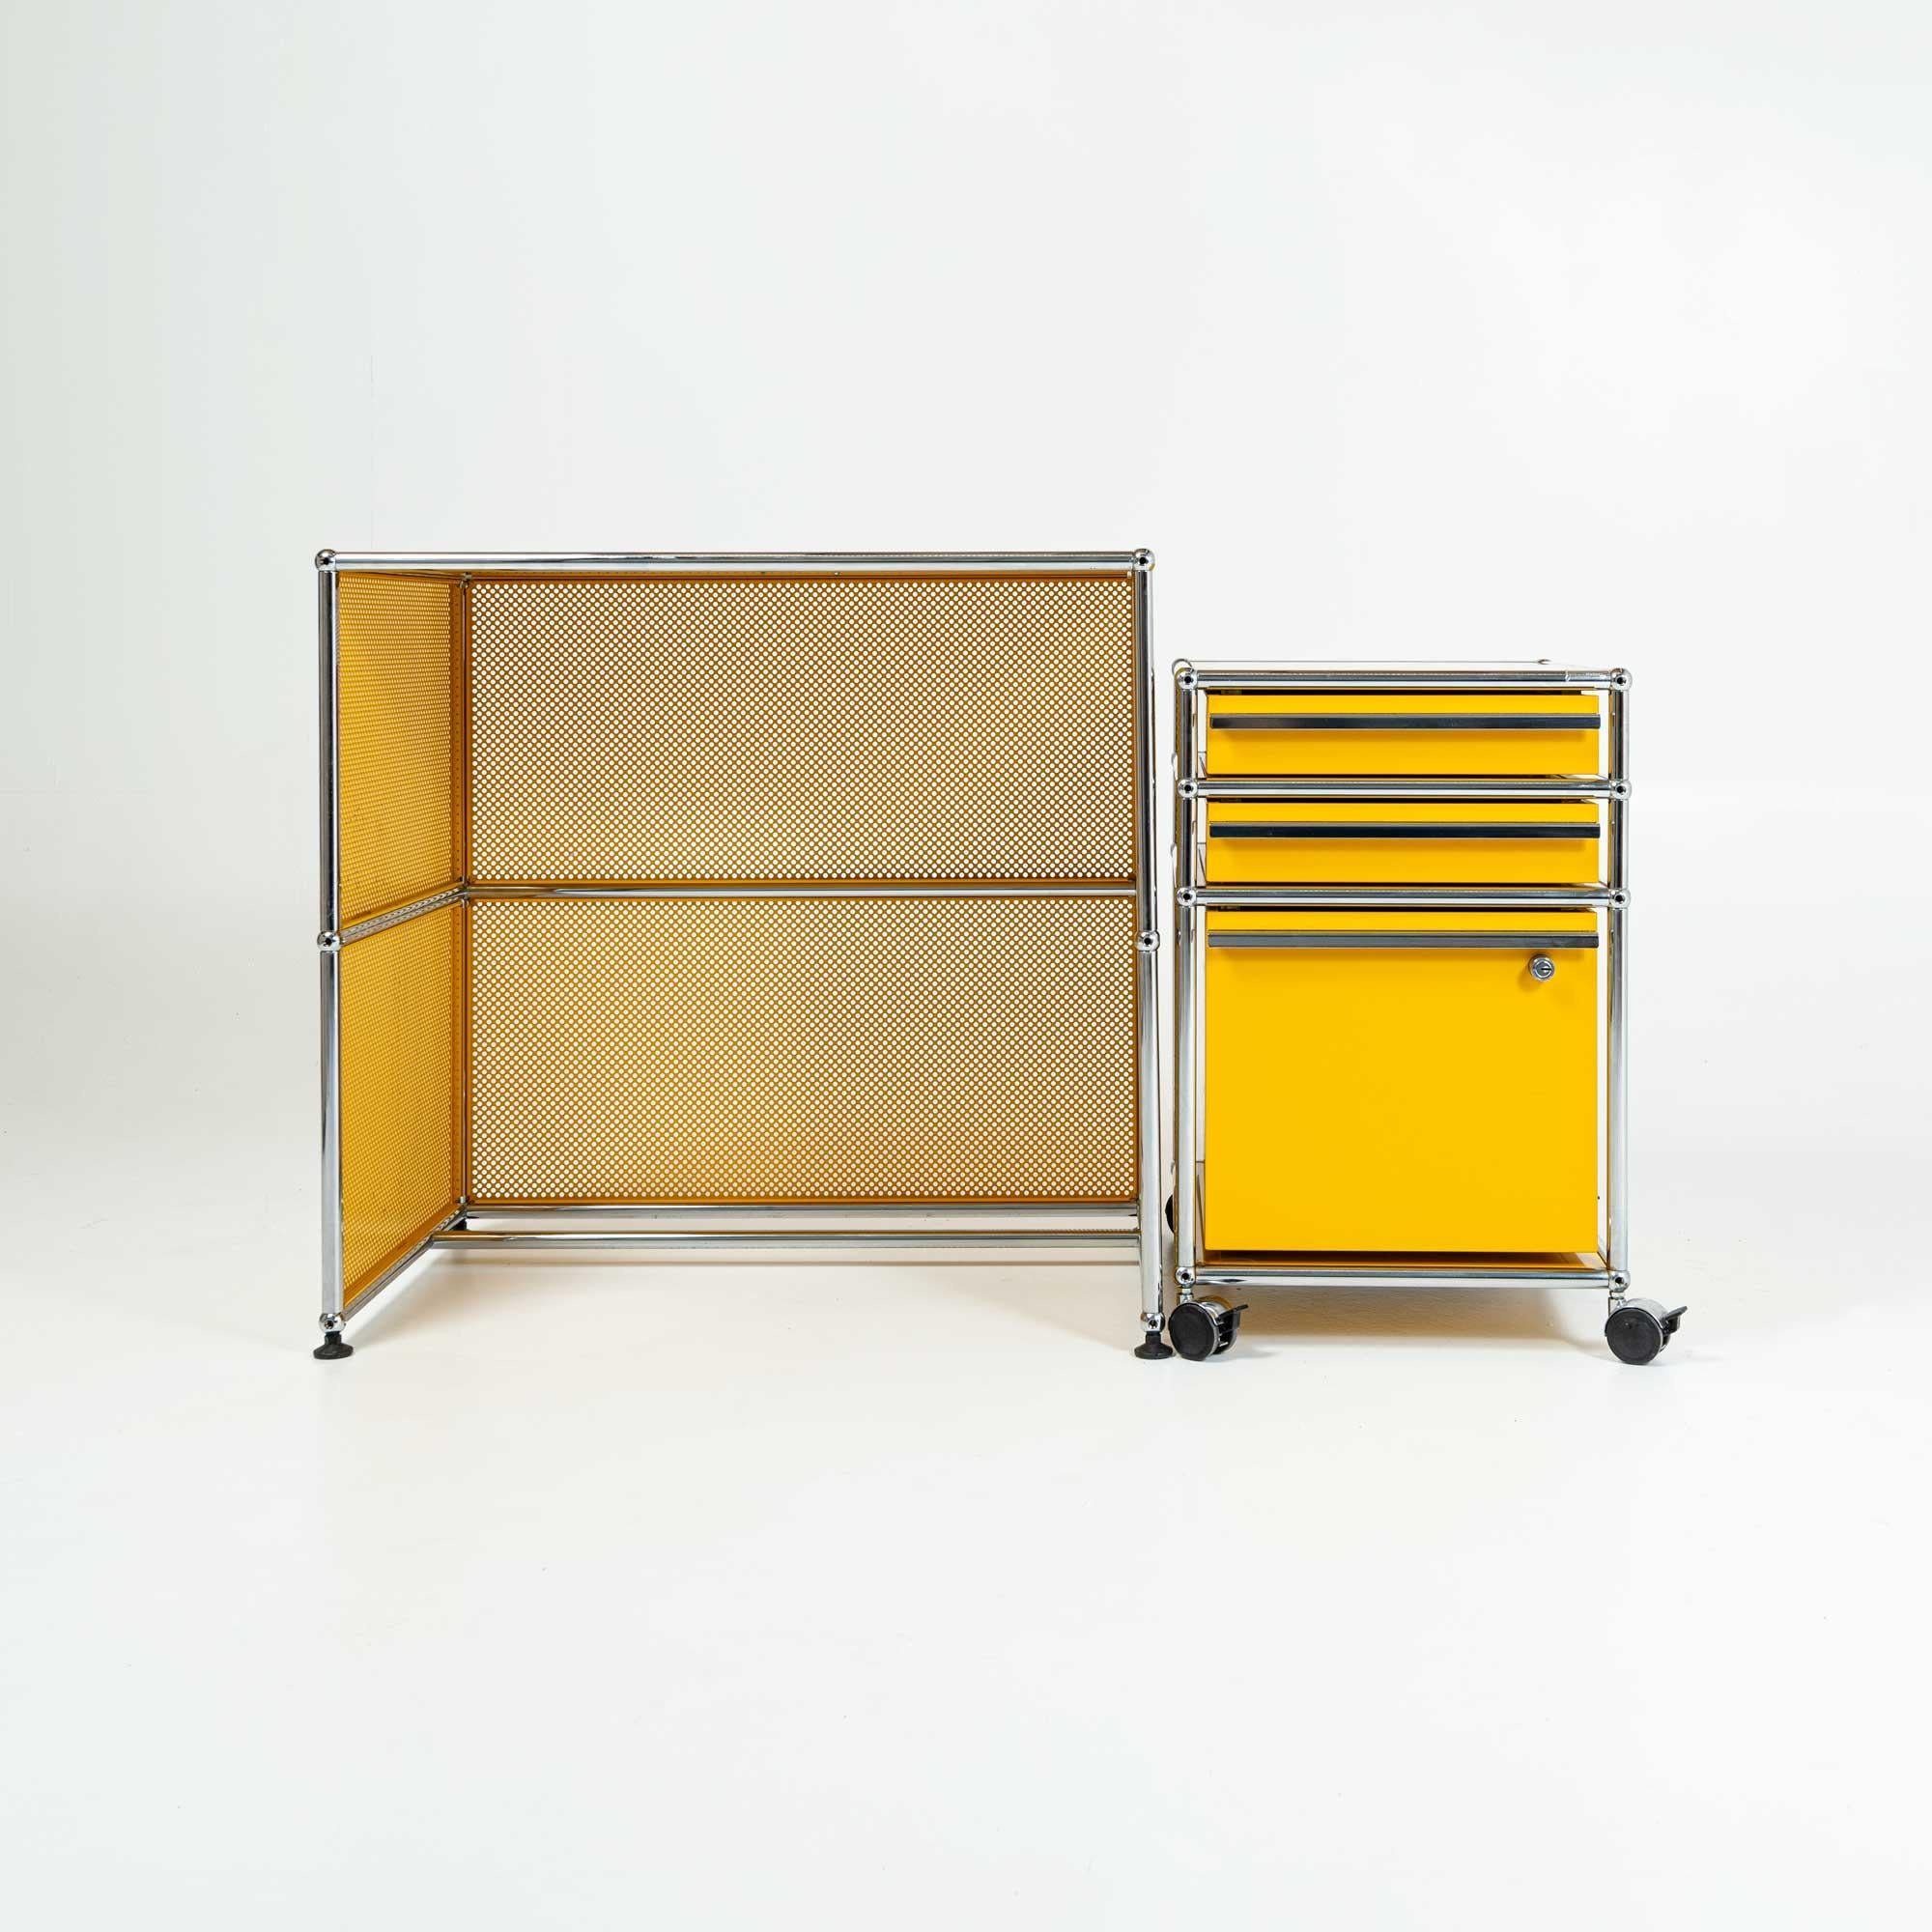 This is a playful Golden Yellow desk and rolling cabinet made by USM Haller in Switzerland, in overall good condition, some light wear on the surface. In overall good condition, ready to be used.

USM has been a Swiss family run business since